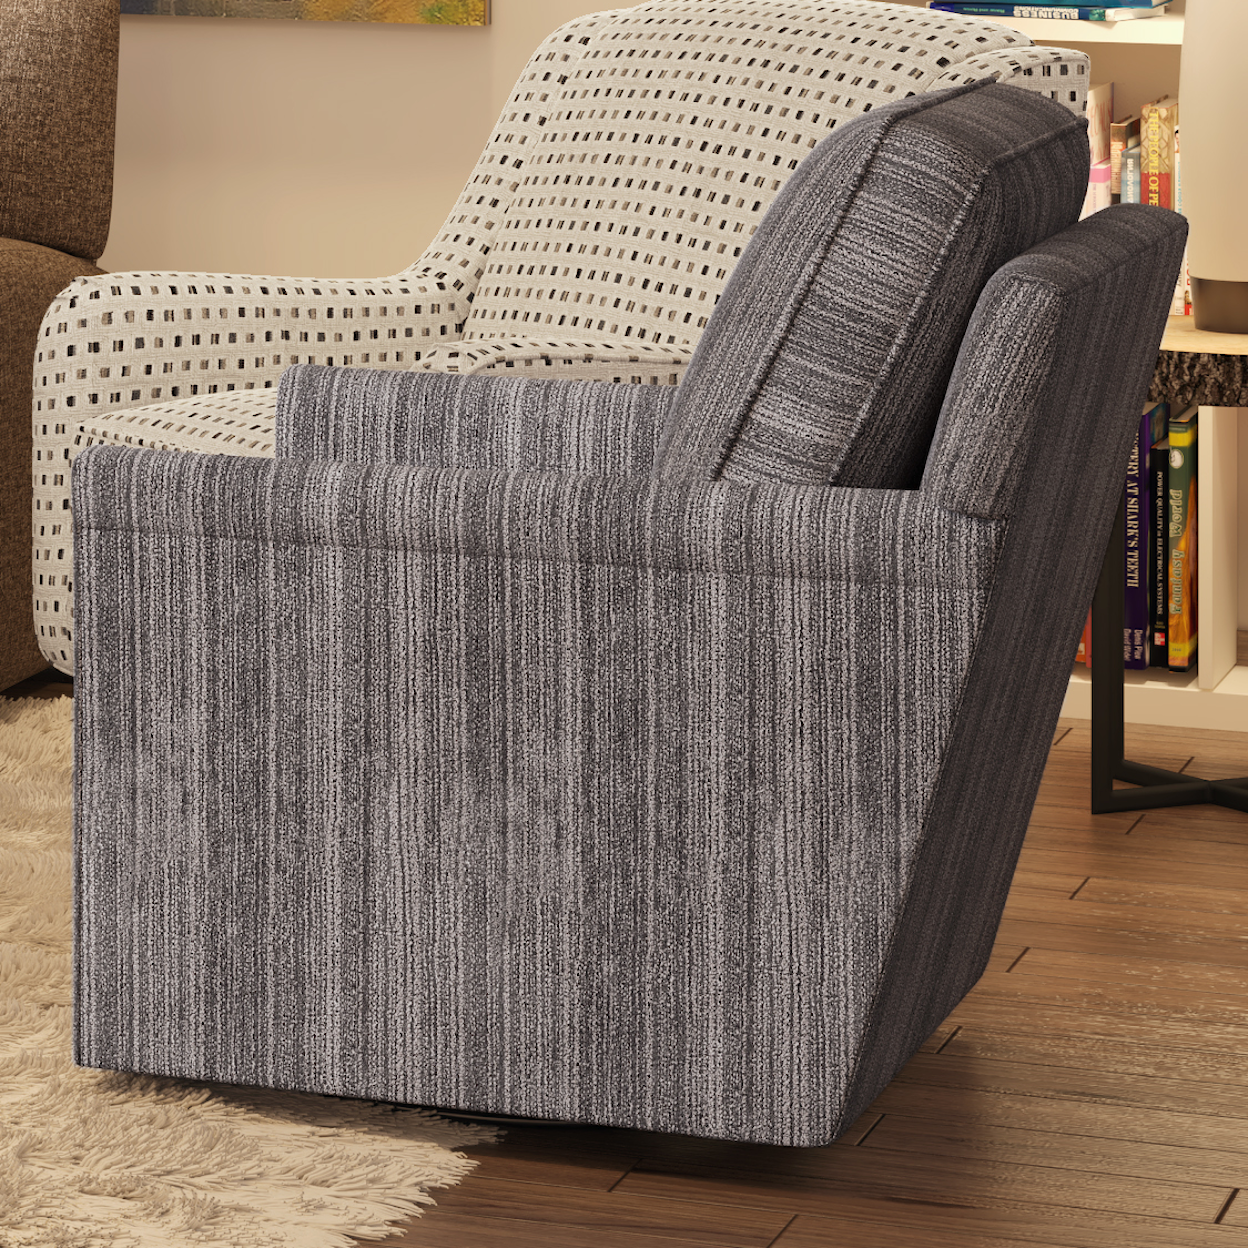 Fusion Furniture 51 MARTY FOSSIL Swivel Glider Chair